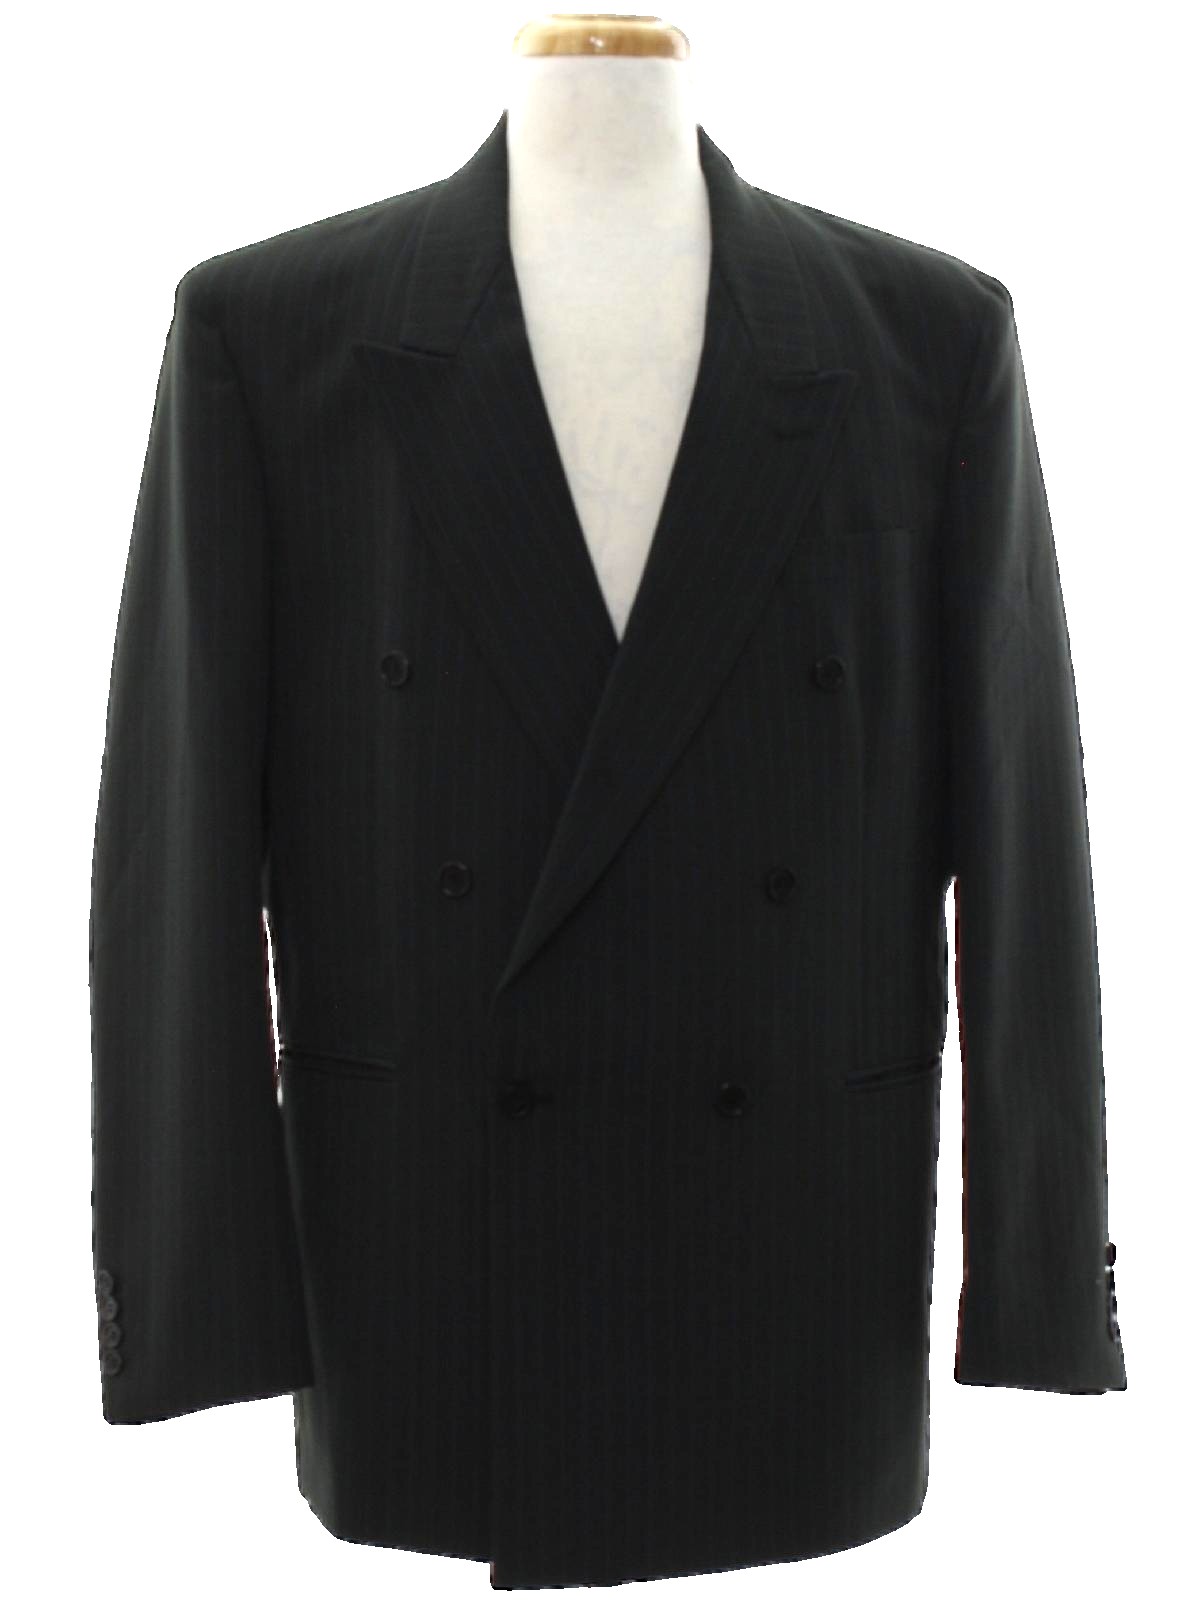 Gino Cappeli 80's Vintage Jacket: 40s style (Made in 80s) -Gino Cappeli ...